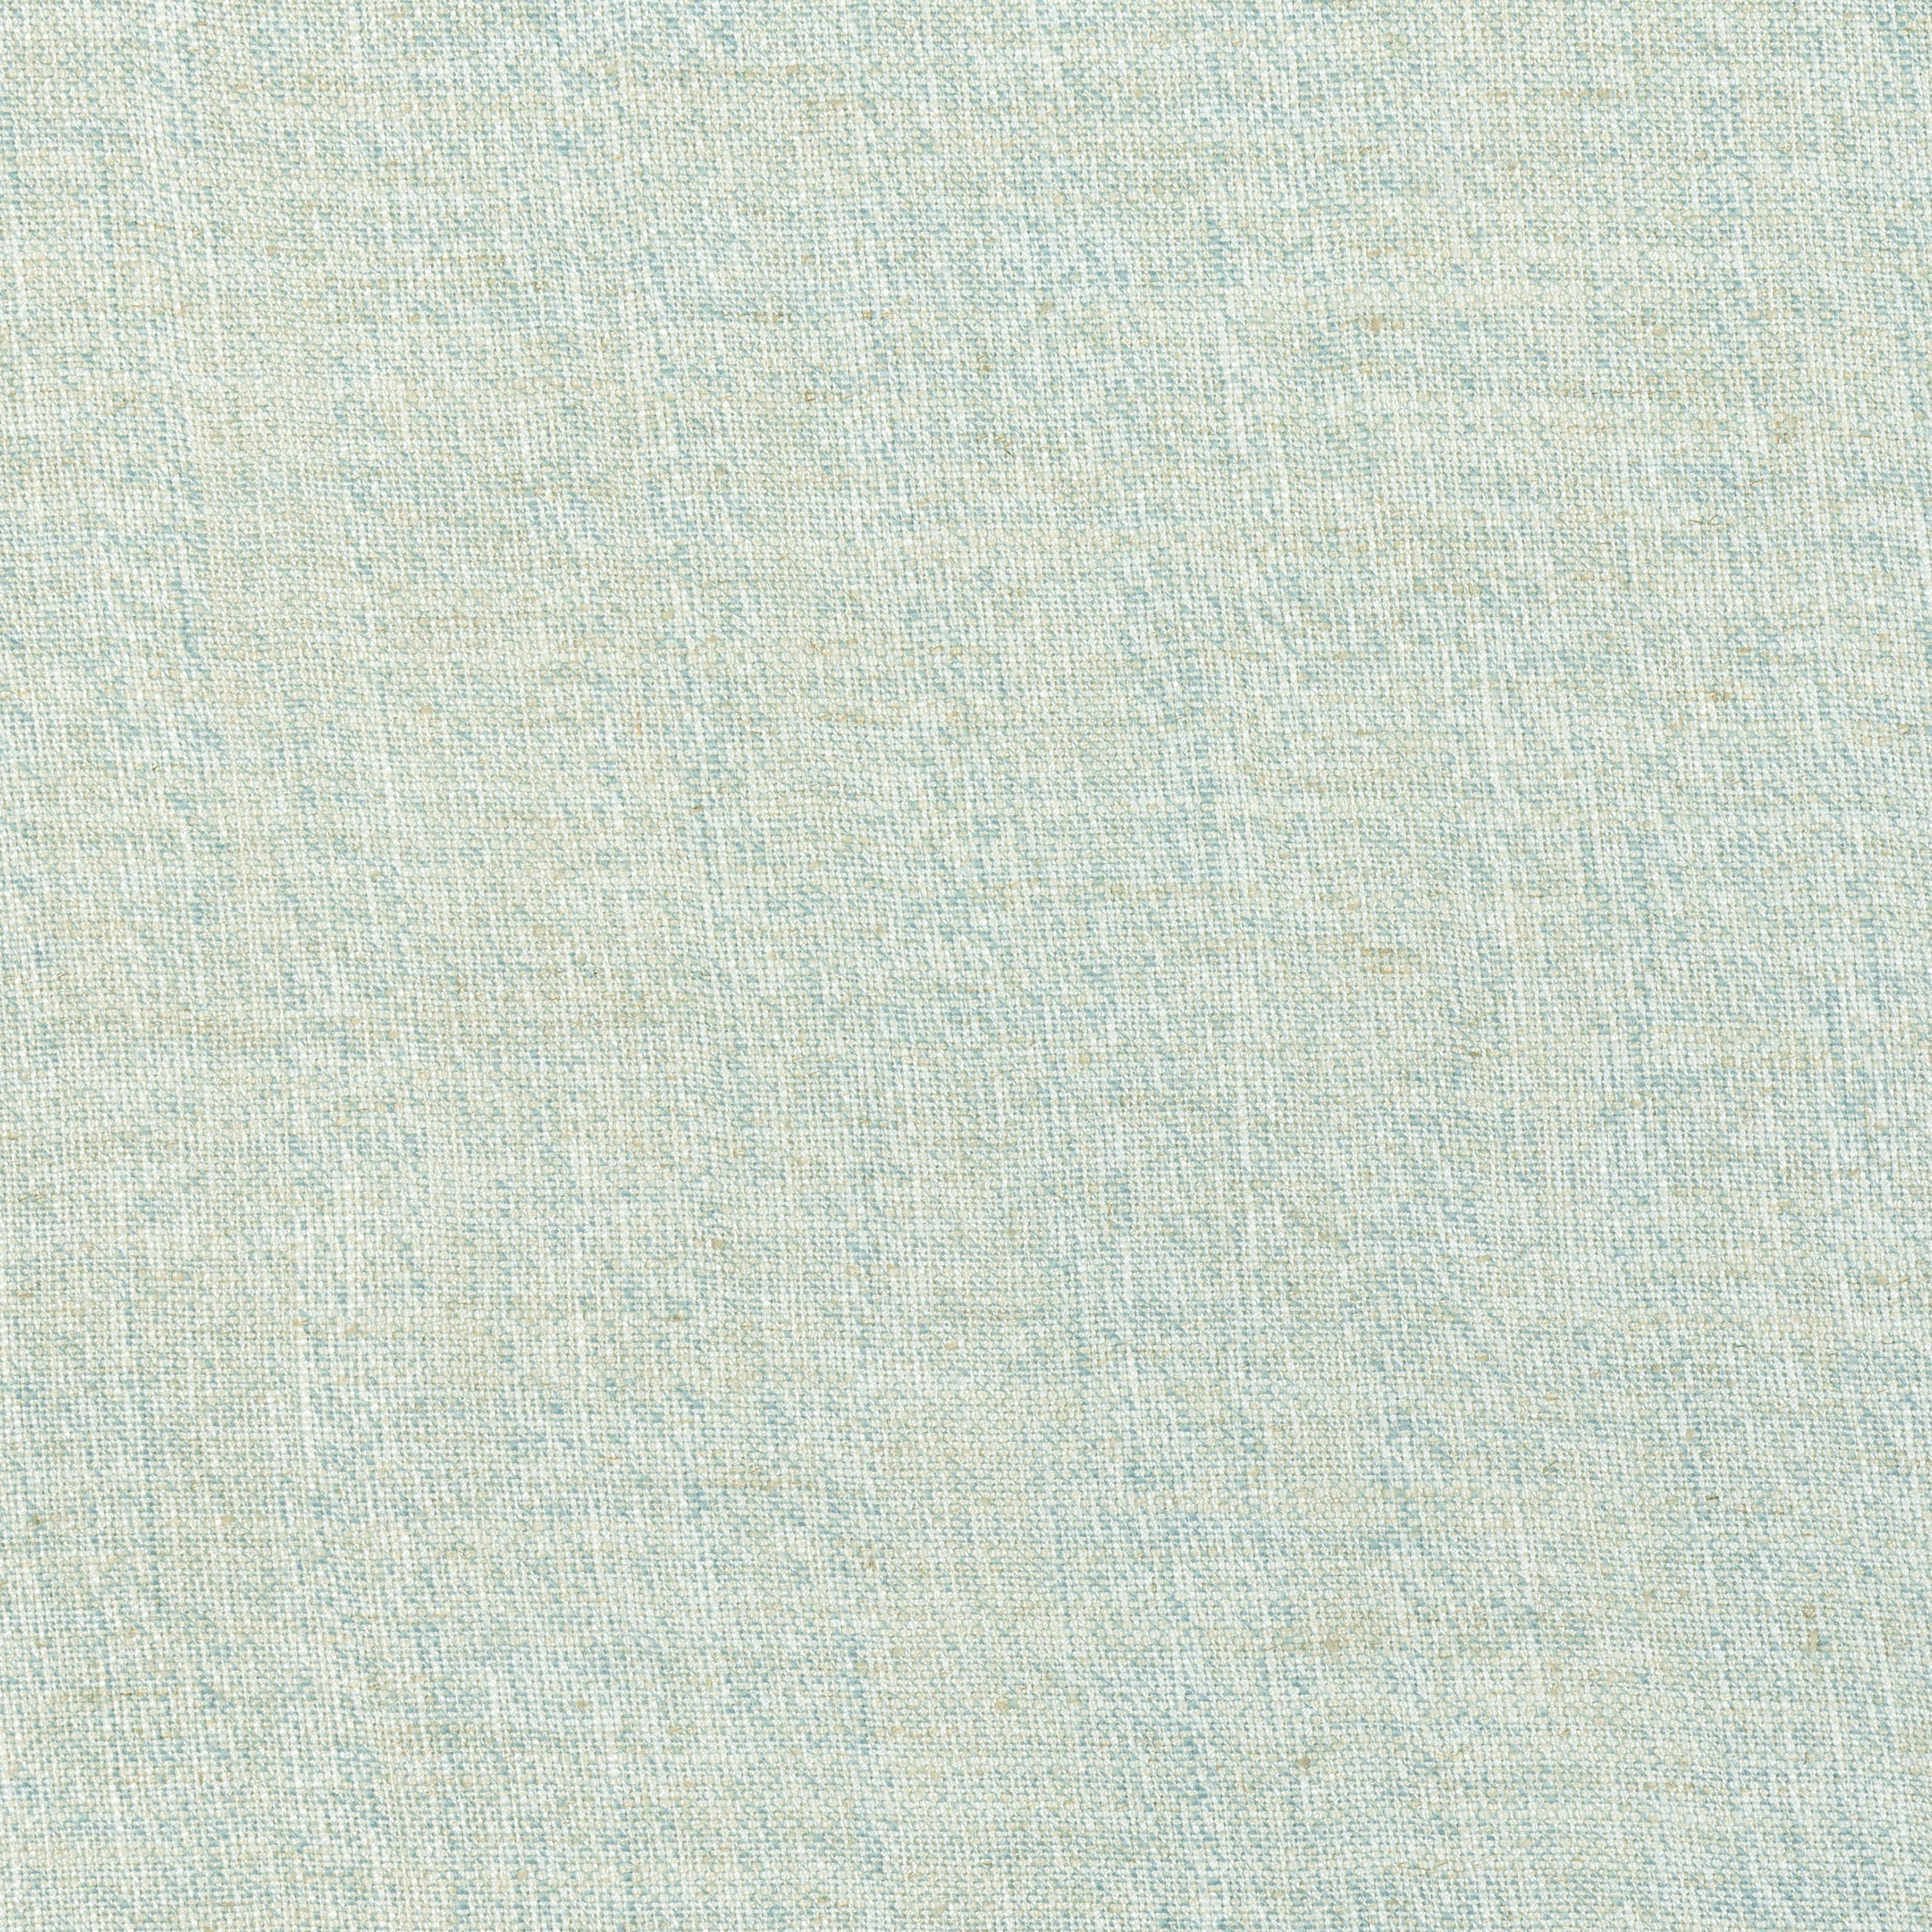 Terra Linen fabric in seafoam color - pattern number FWW7686 - by Thibaut in the Palisades collection